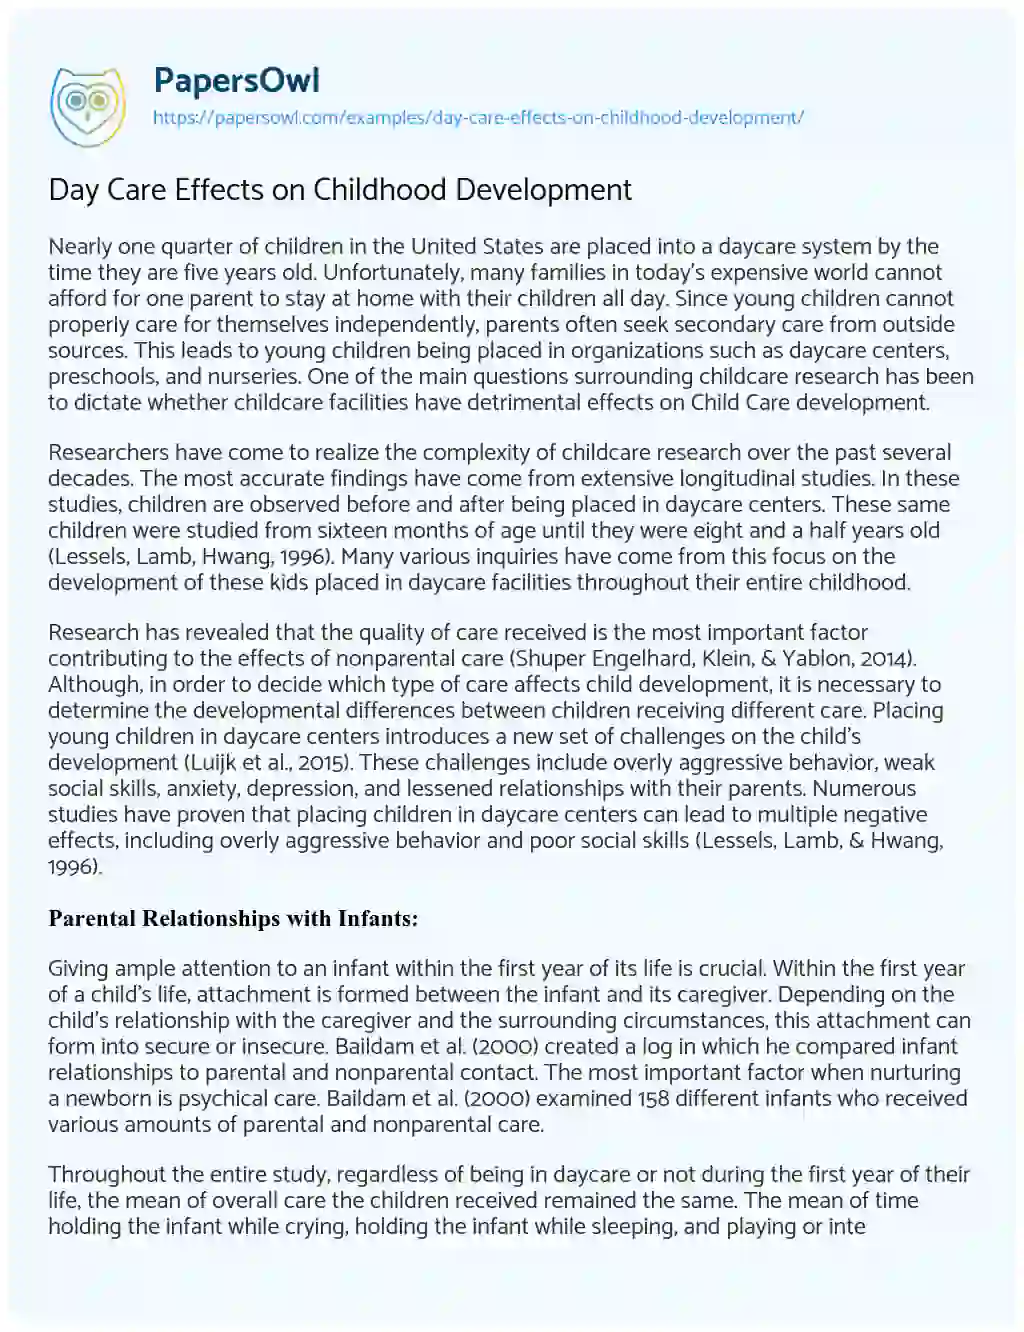 Day Care Effects on Childhood Development essay